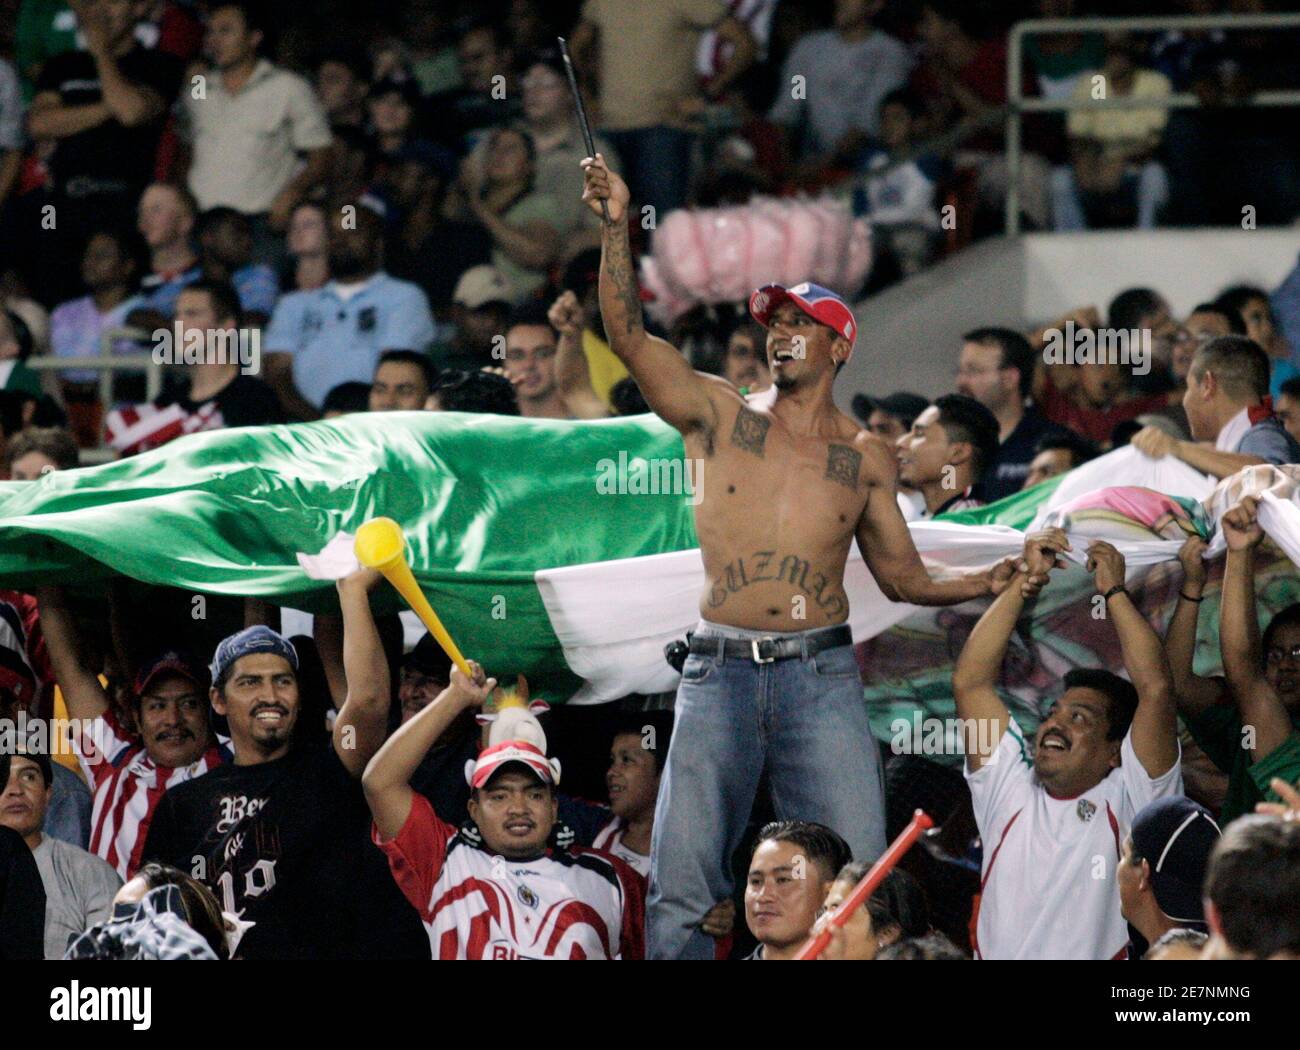 CD Guadalajara fans celebrate their team's first and only goal against D.C. United during their Copa Sudamericana soccer match in Washington, September 26, 2007. REUTERS/Gary Cameron  (UNITED STATES) Stock Photo